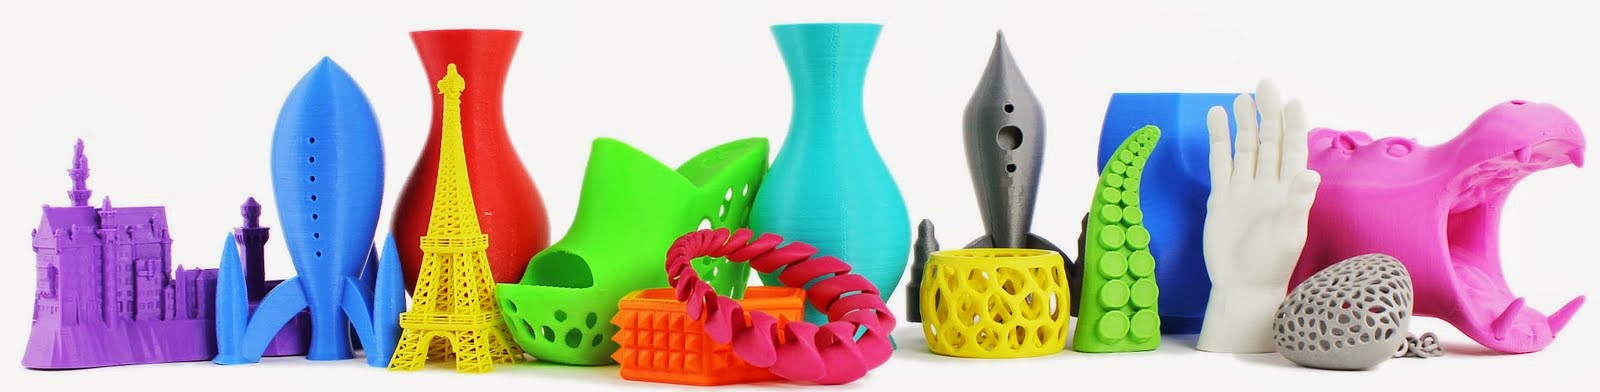 3D Printer Objects